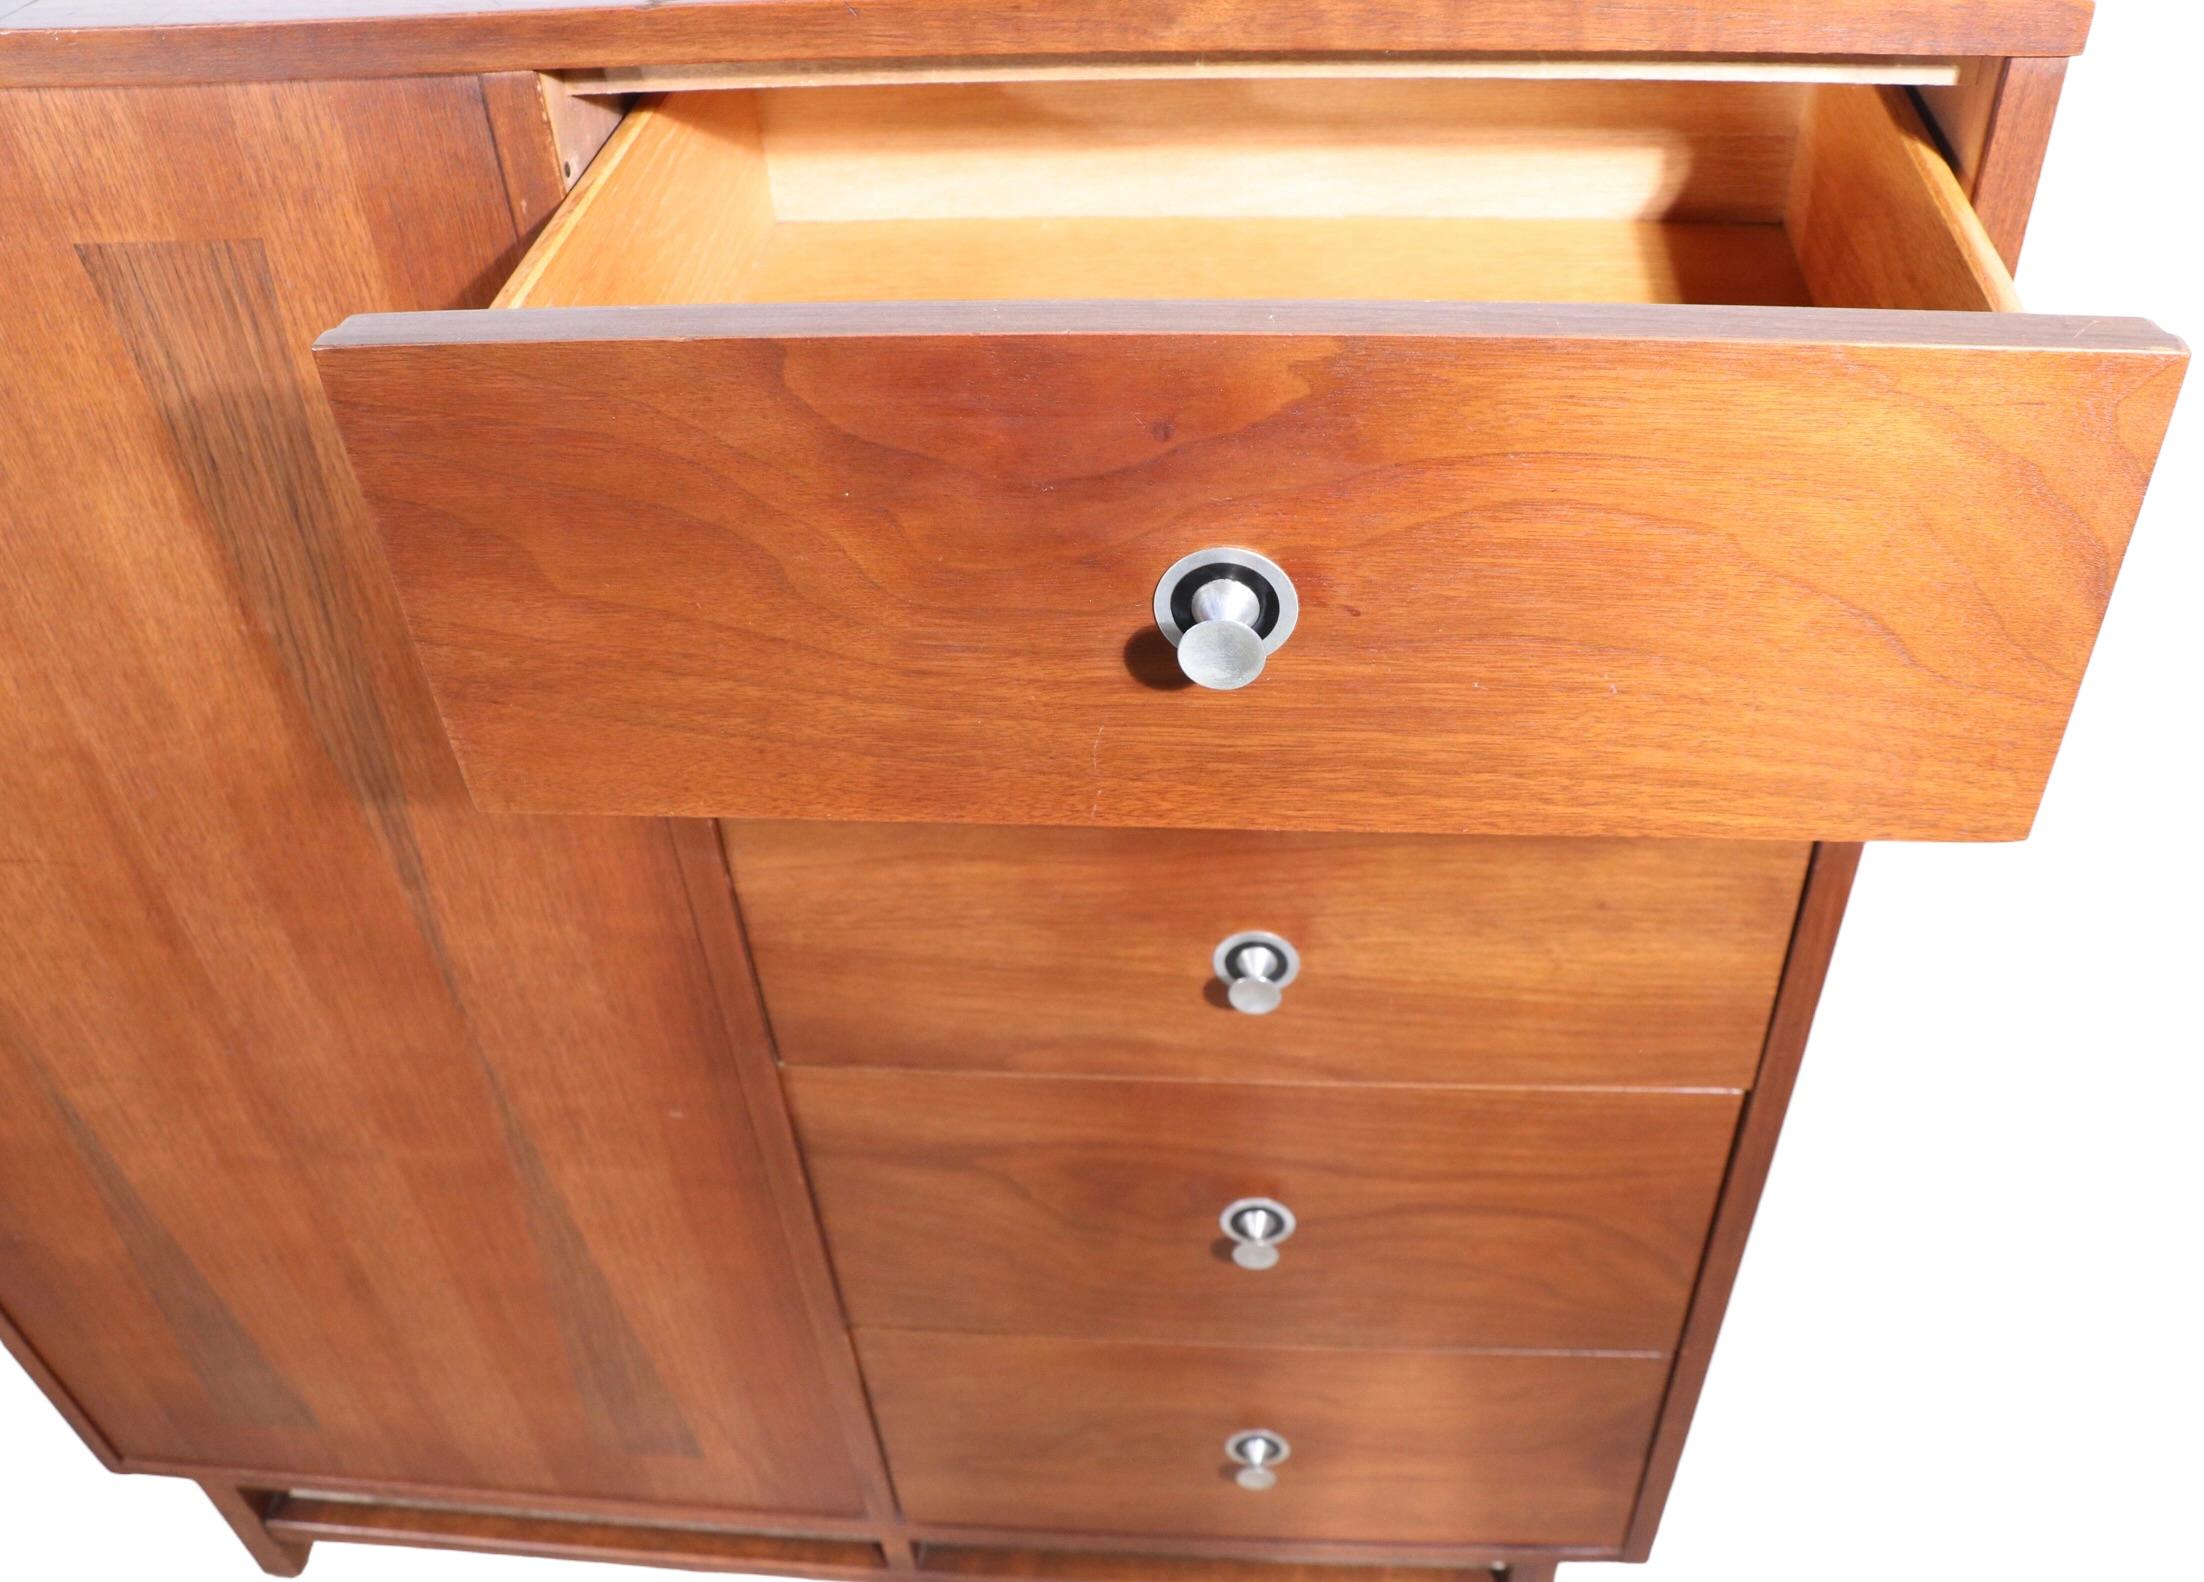 Exceptional mid century wardrobe by noted American furniture maker, marked Distinctive Furniture by Stanley.
The chest features an unusual wardrobe section which opens from the side, flanked by a bank of five deep drawers, providing ample storage